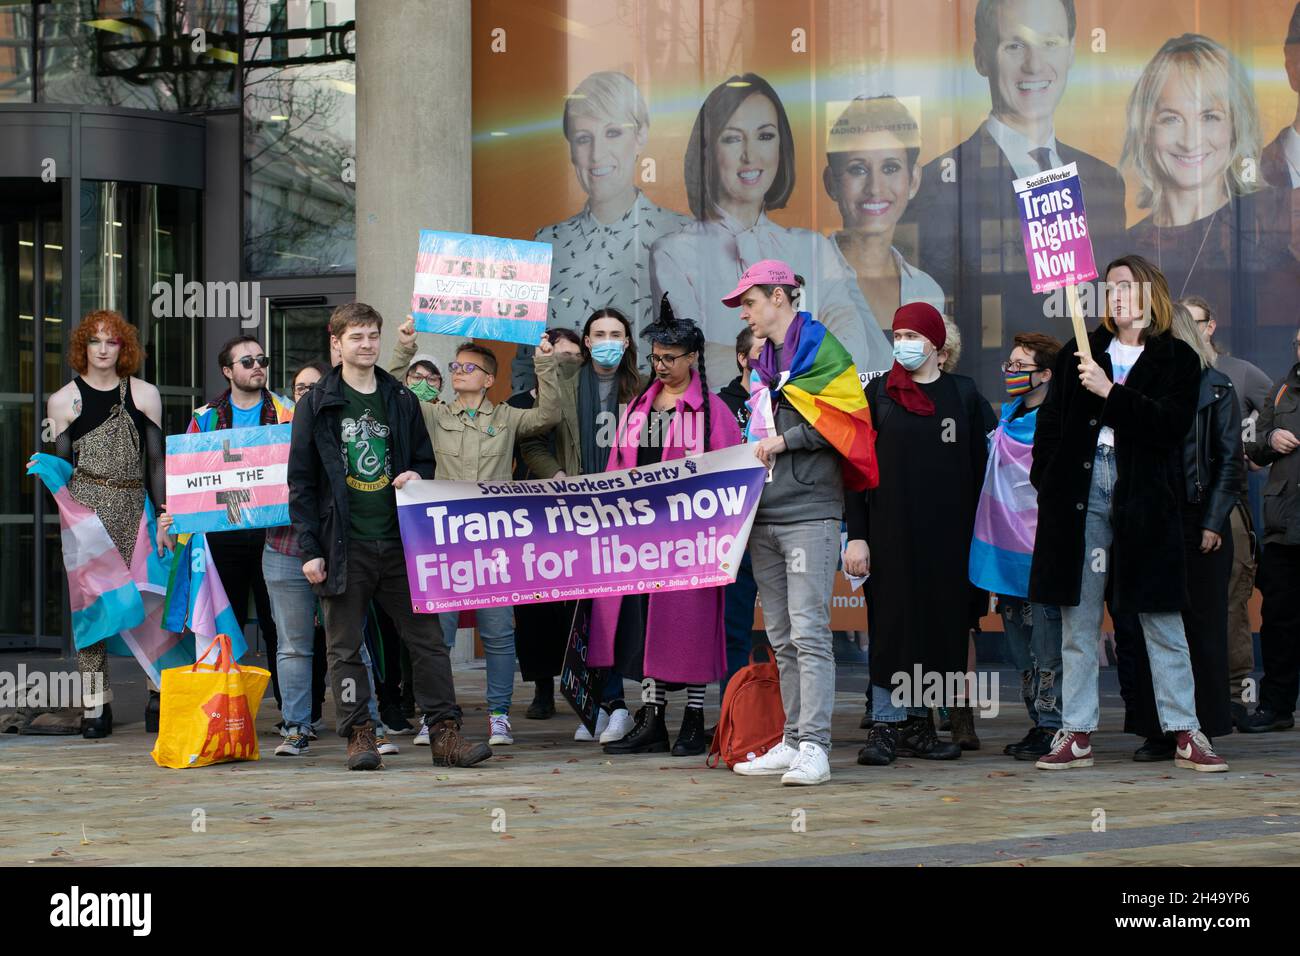 Trans rights protest outside the BBC studio Salford Quays Media City. Sign text L with the T and Trans Rights Now Stock Photo